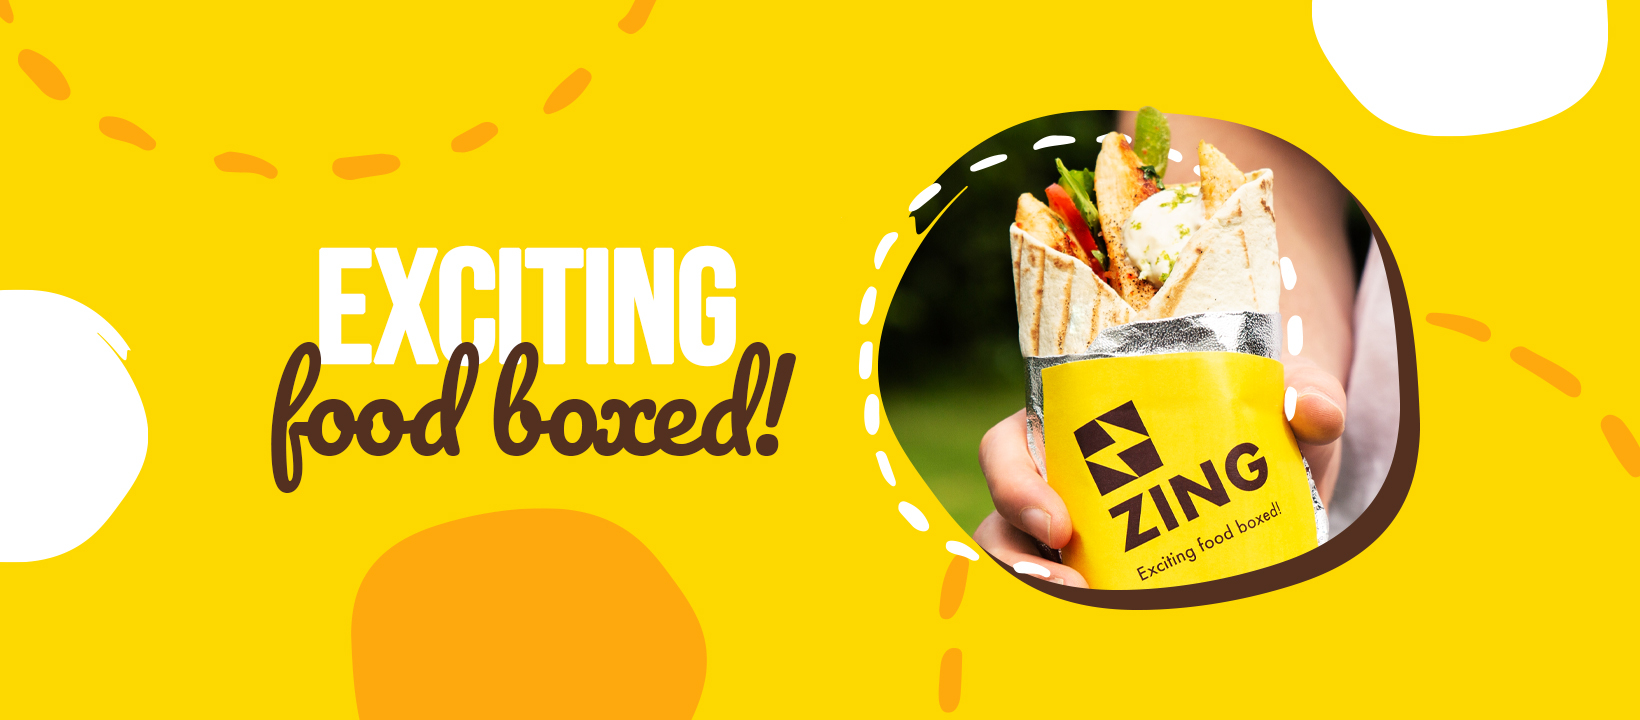 Zing takeaway - Zing on Nicholas Street offers delicious and nutritious takeaways to families for an affordable price.